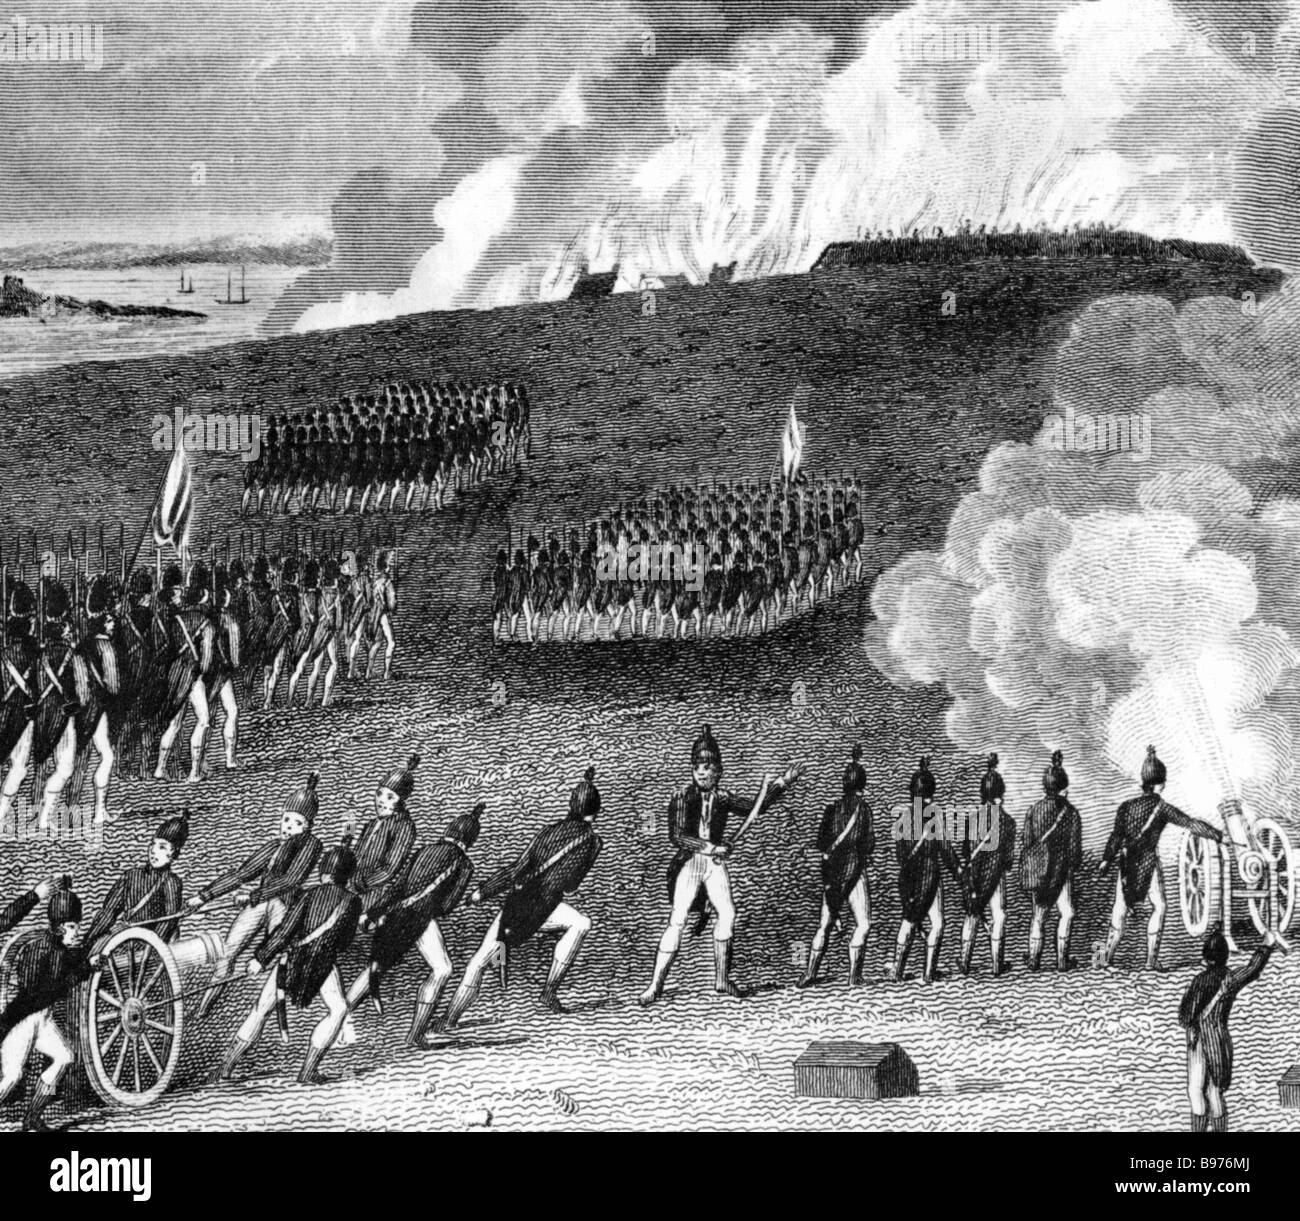 BATTLE OF BUNKER HILL in 1775 during the American War of Independence  - see Description below Stock Photo